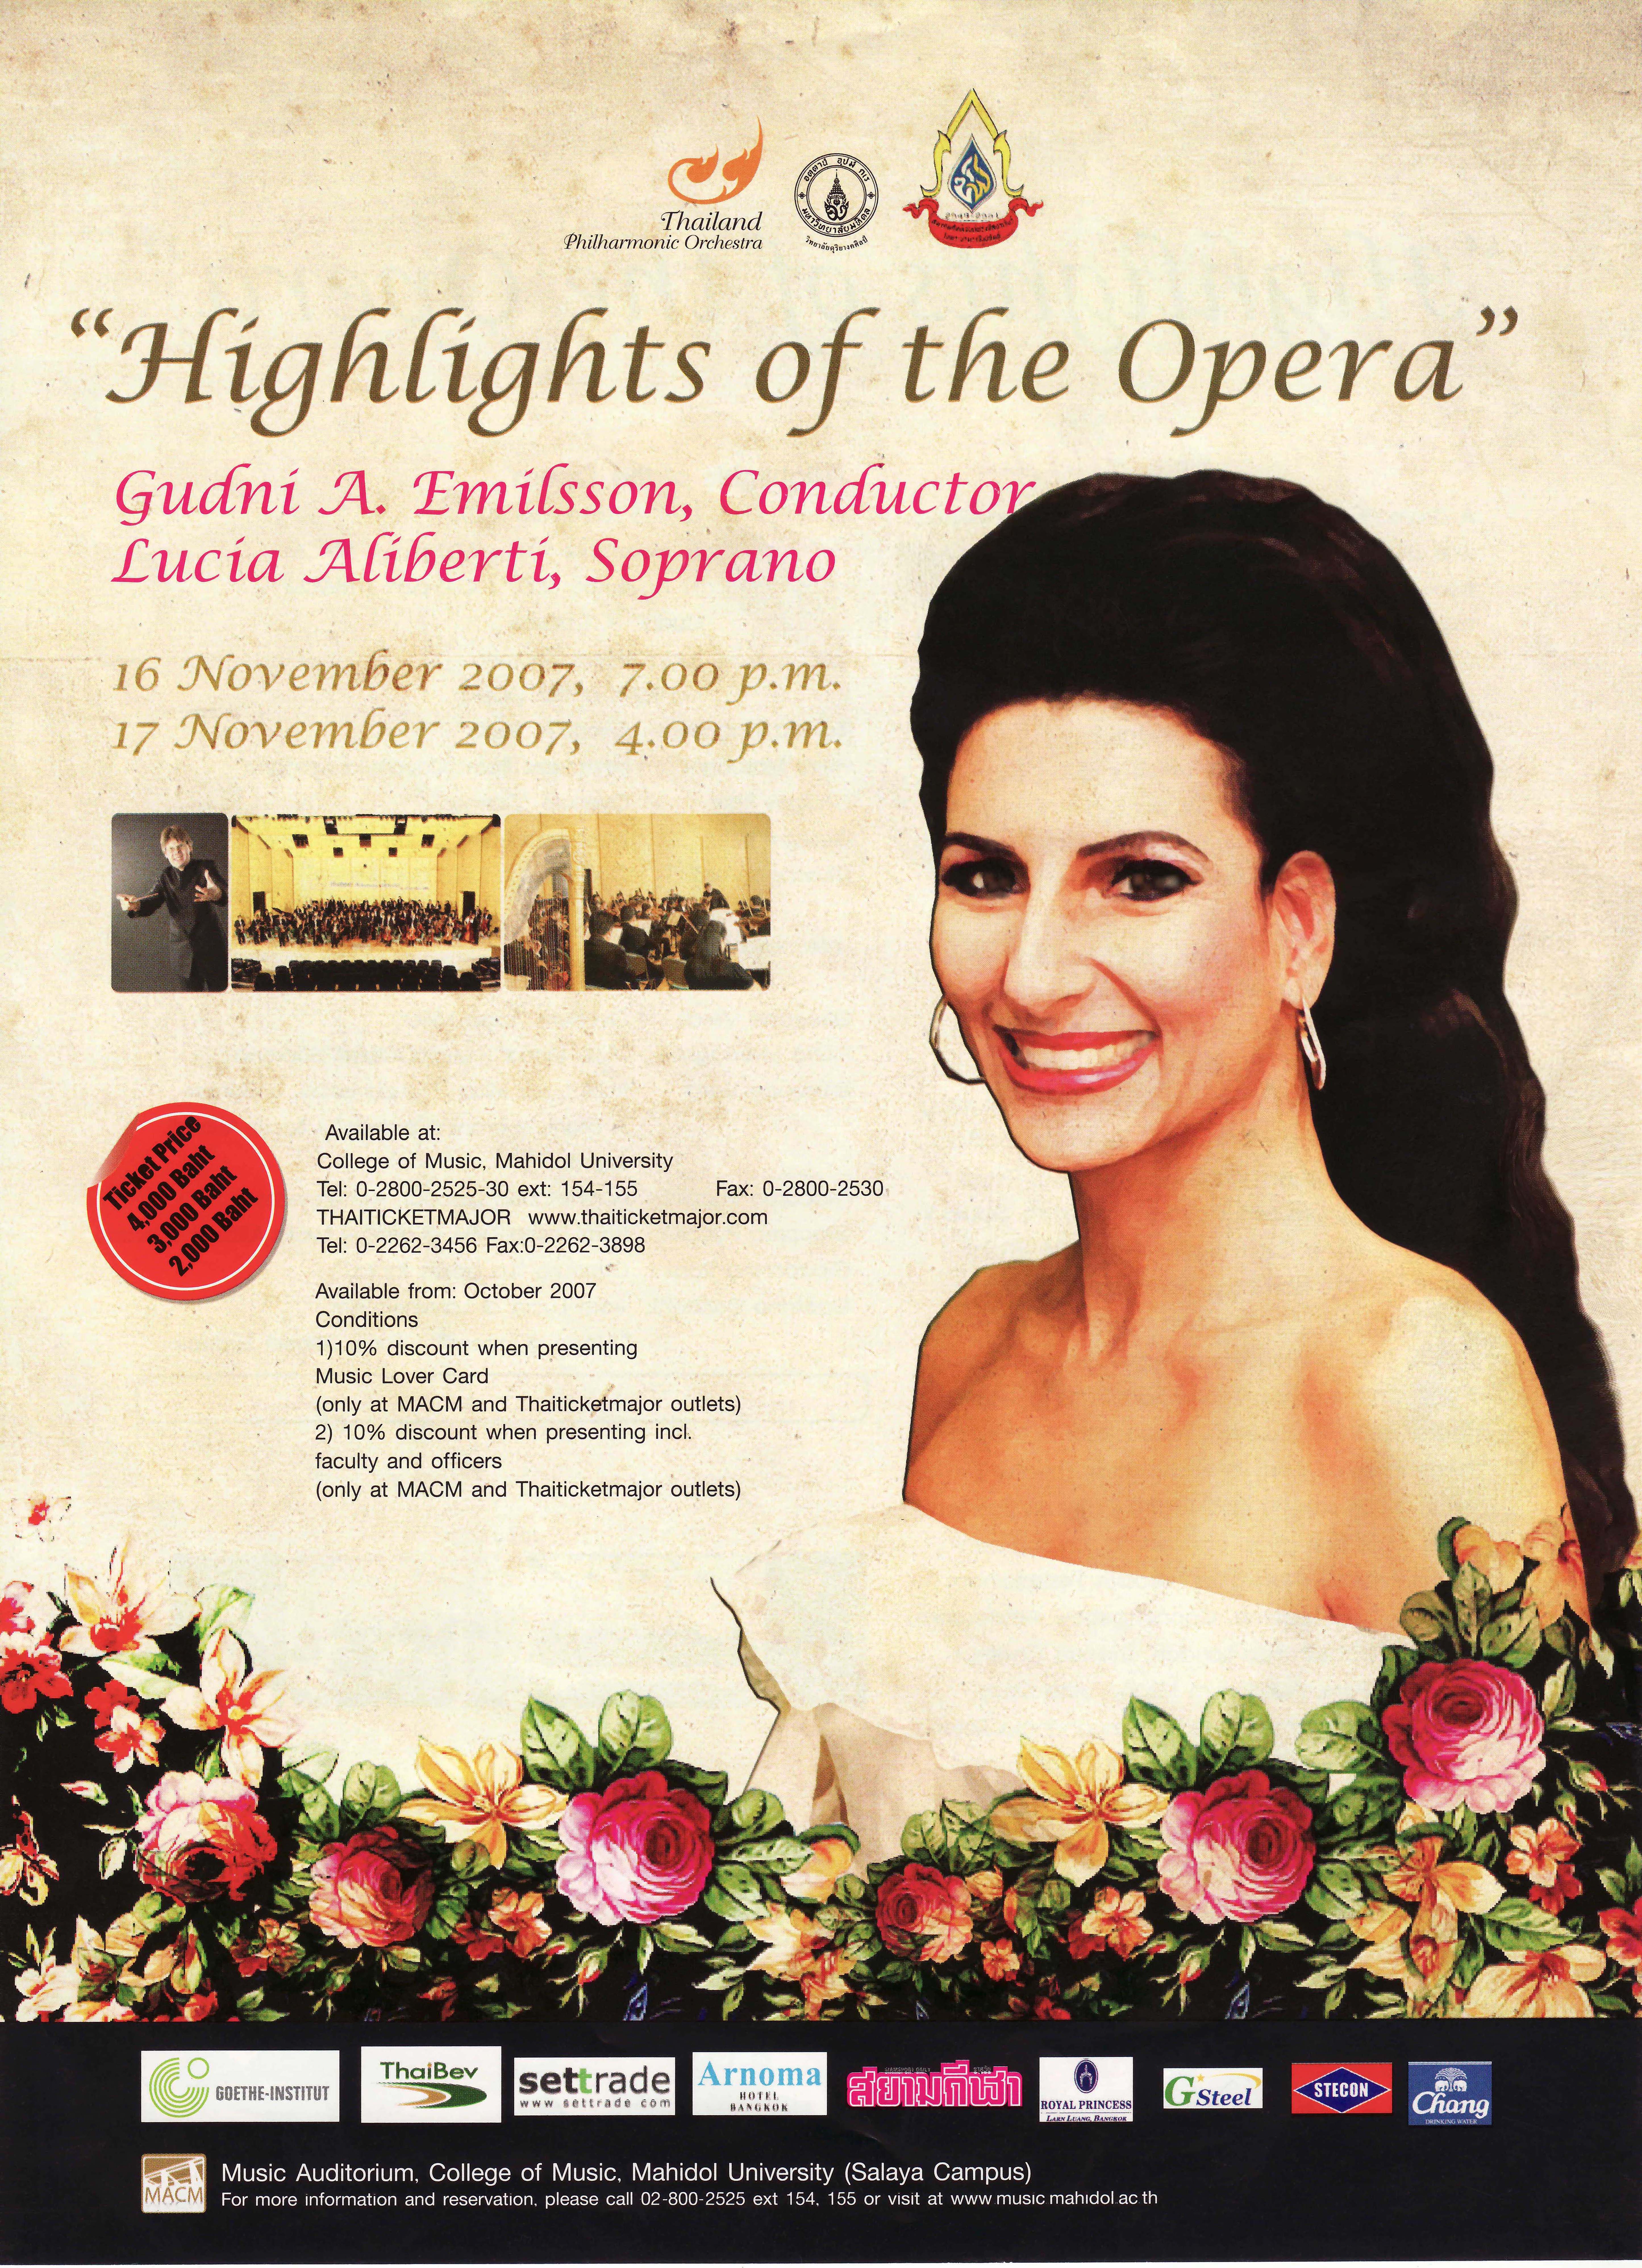 Lucia Aliberti⚘Special Gala Concert⚘in honor of Queen Sirikit of Thailand⚘”Highlights Of The Opera"⚘conductor Gudni A.Emilsson⚘Bangkok⚘Thailand⚘:http://www.luciaaliberti.it #luciaaliberti #queensirikit #gudniaemilsson #bangkok #thailand #specialconcert